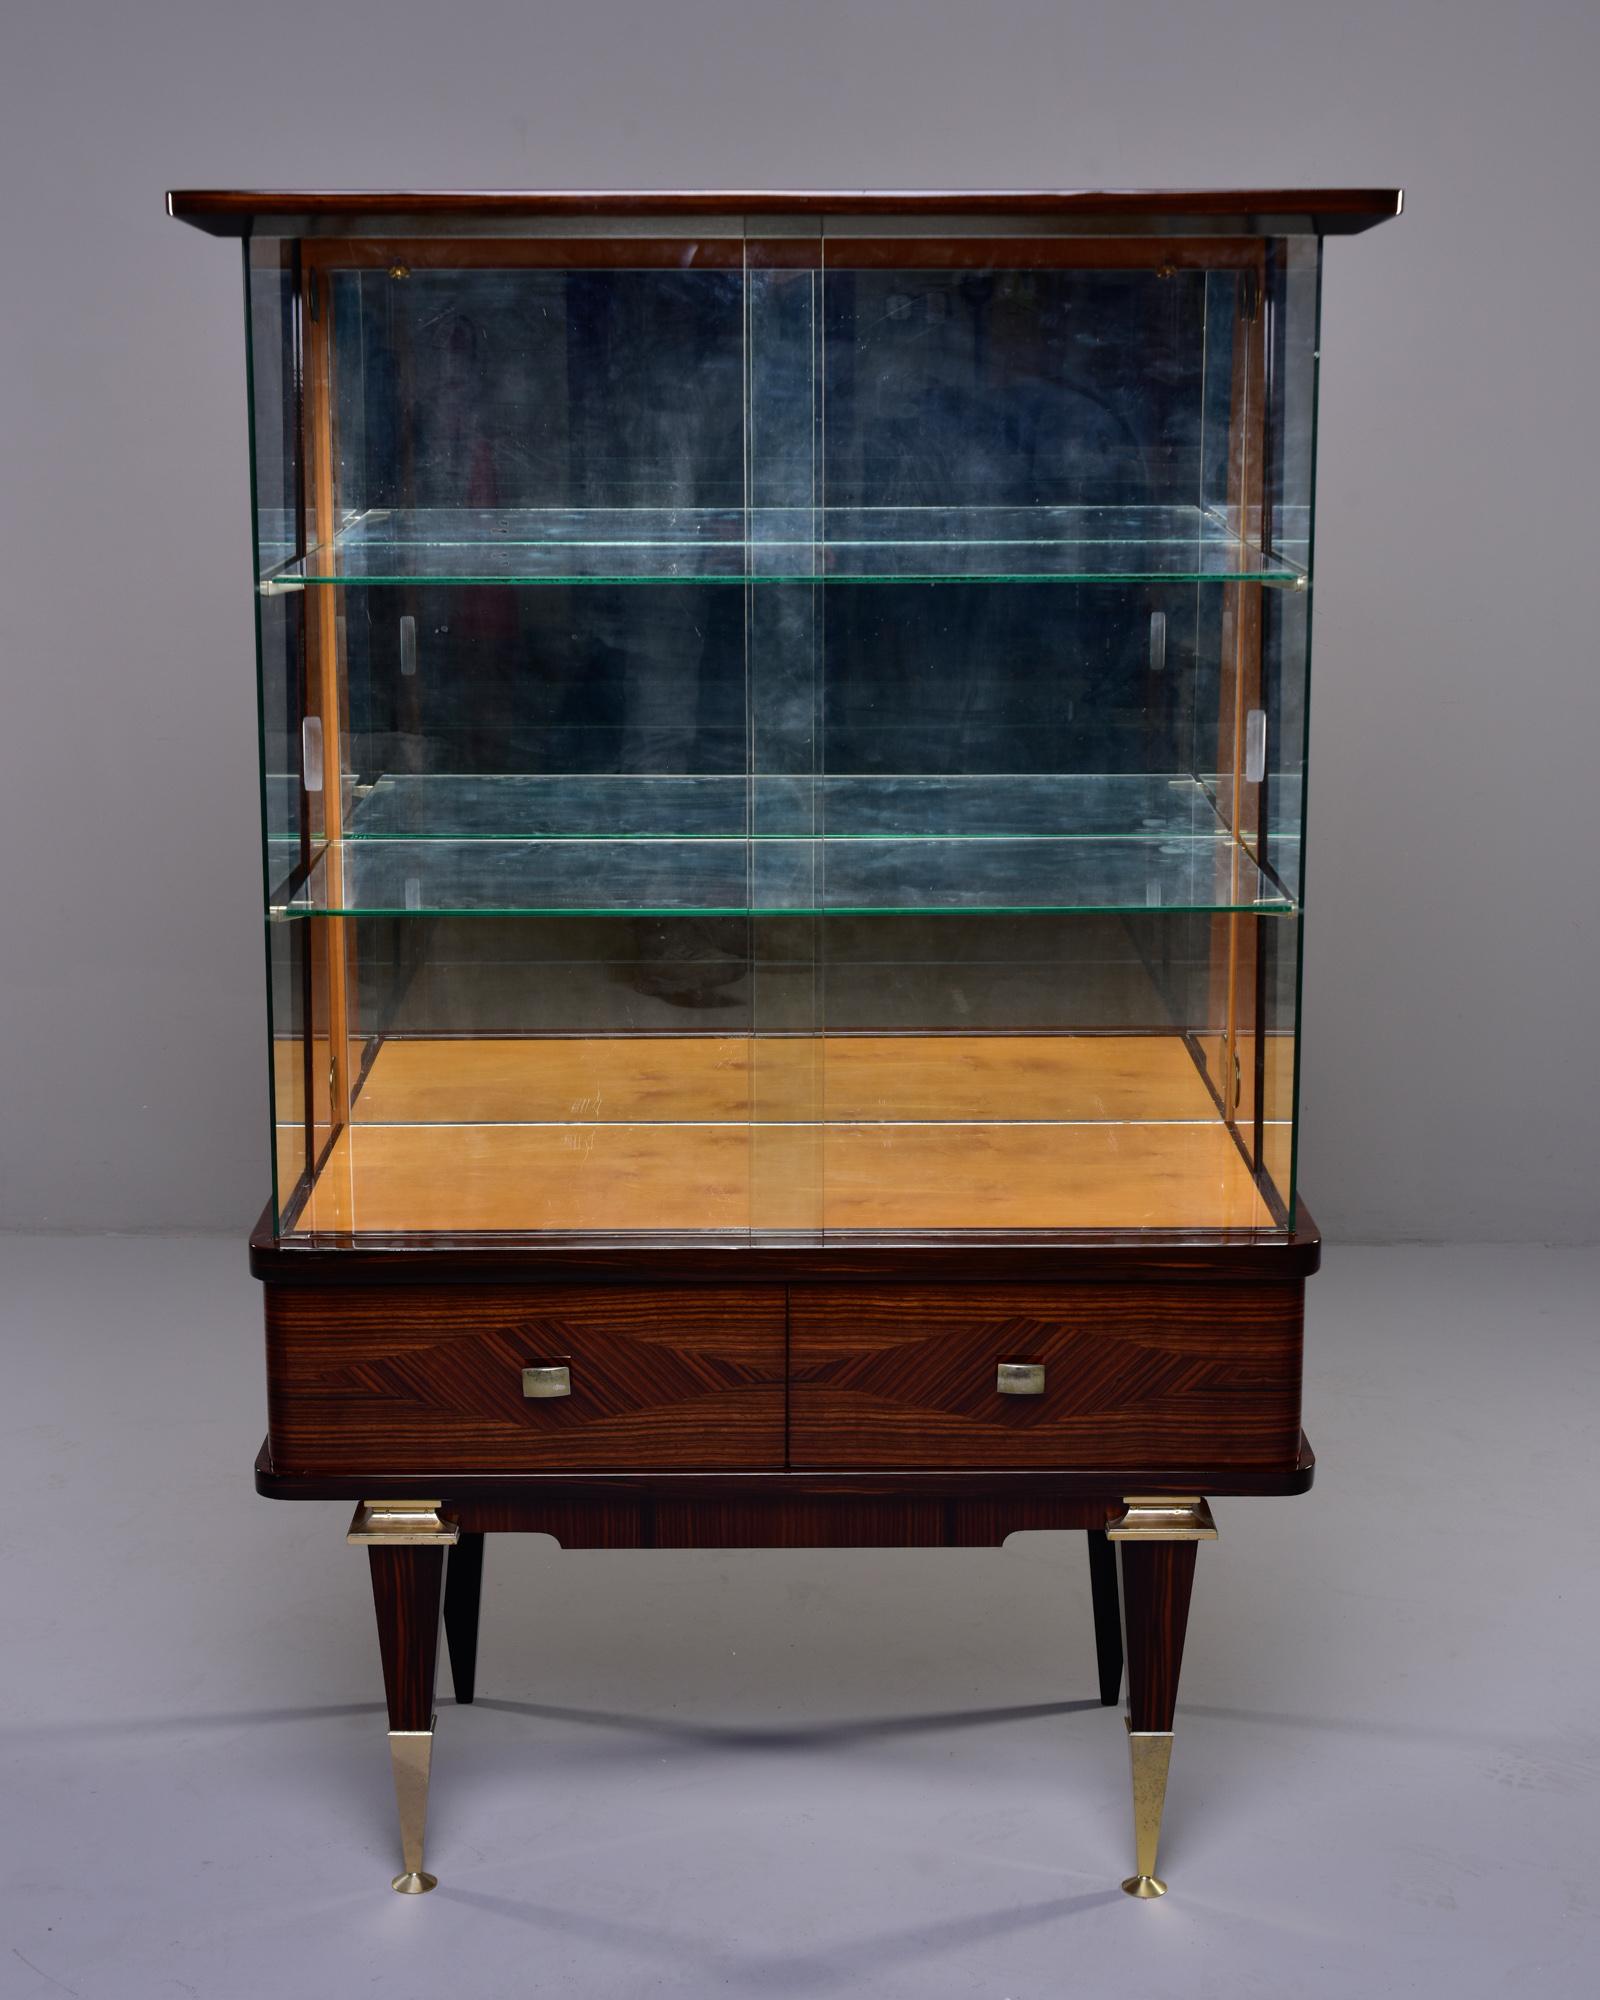 Circa 1940s French Art Deco vitrine in macassar ebony with marquetry pattern and contrasting maple interior trim. Brass trimmed legs. Sliding glass doors with two adjustable interior glass shelves and mirrored back. 

Very good vintage condition